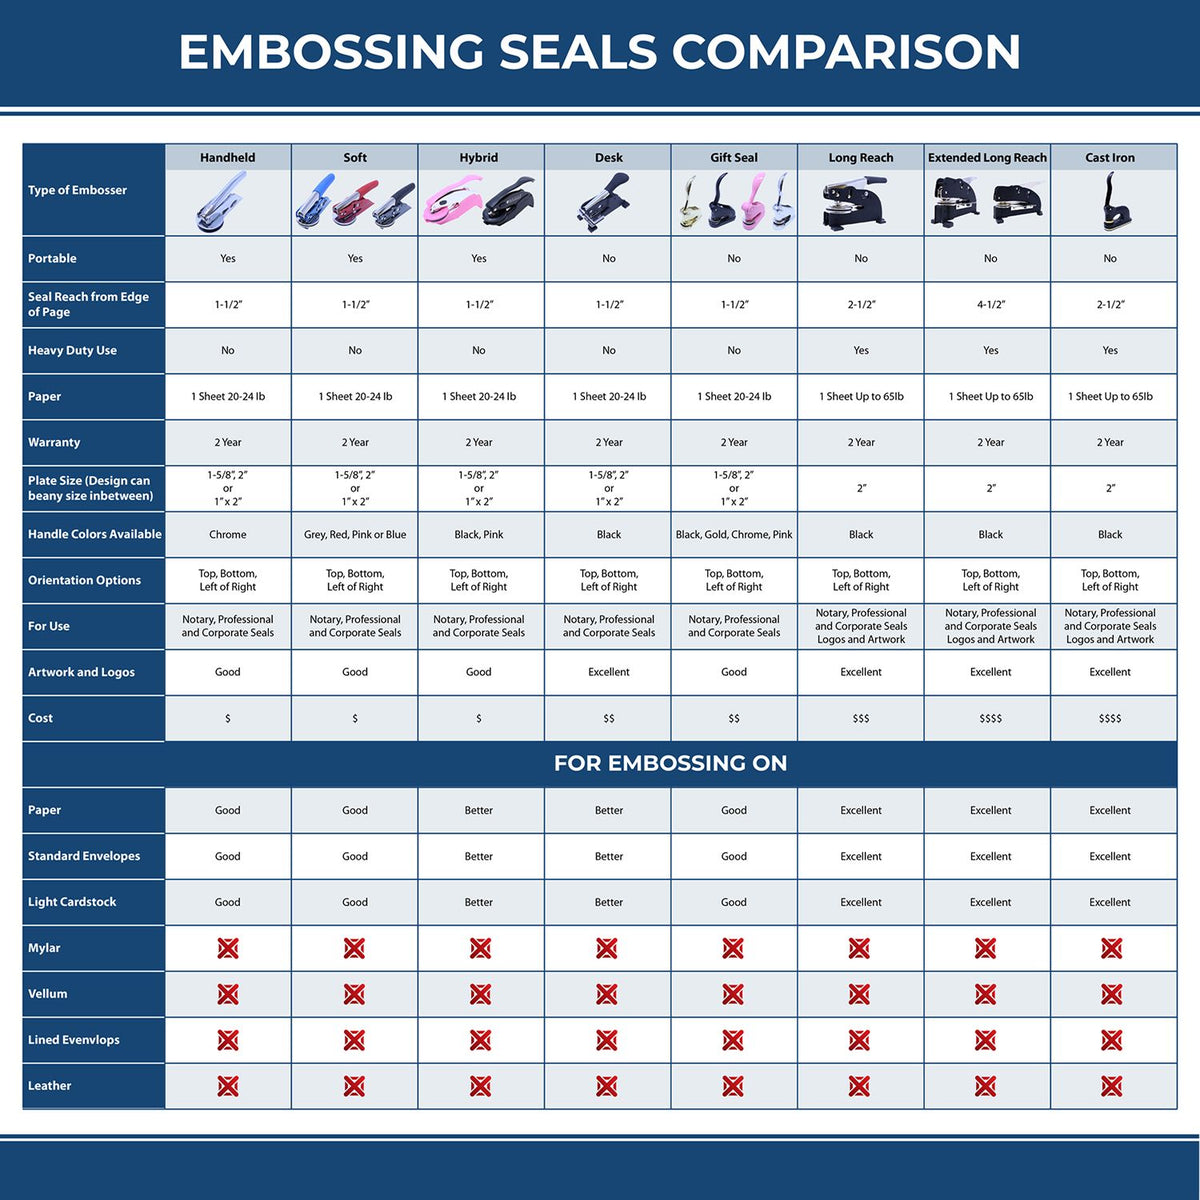 A comparison chart for the different types of mount models available for the Hybrid Hawaii Engineer Seal